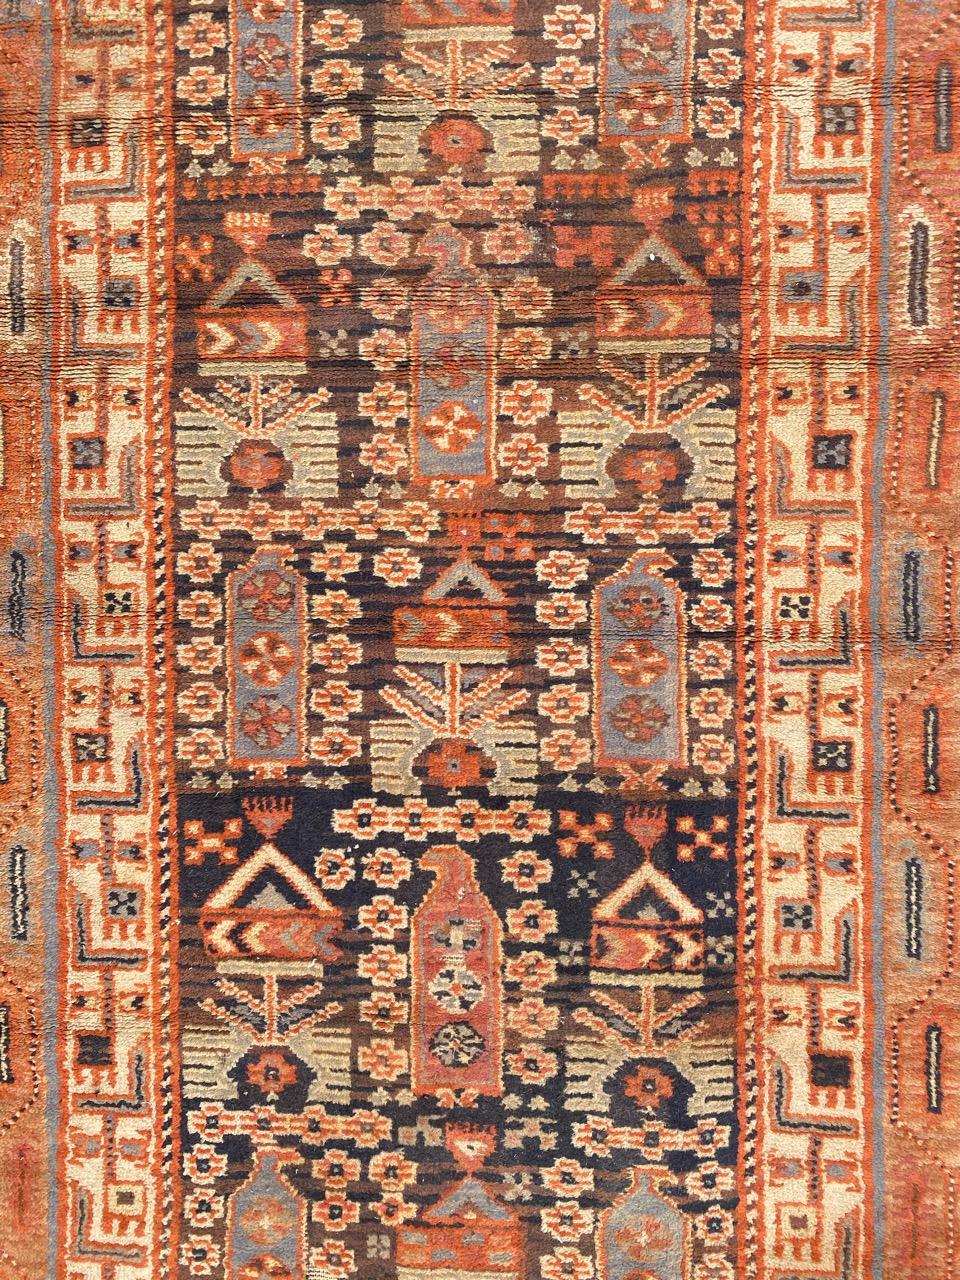 Beautiful early 20th century French knotted rug with nice Persian design and beautiful colors, entirely knotted with wool velvet on cotton foundation.